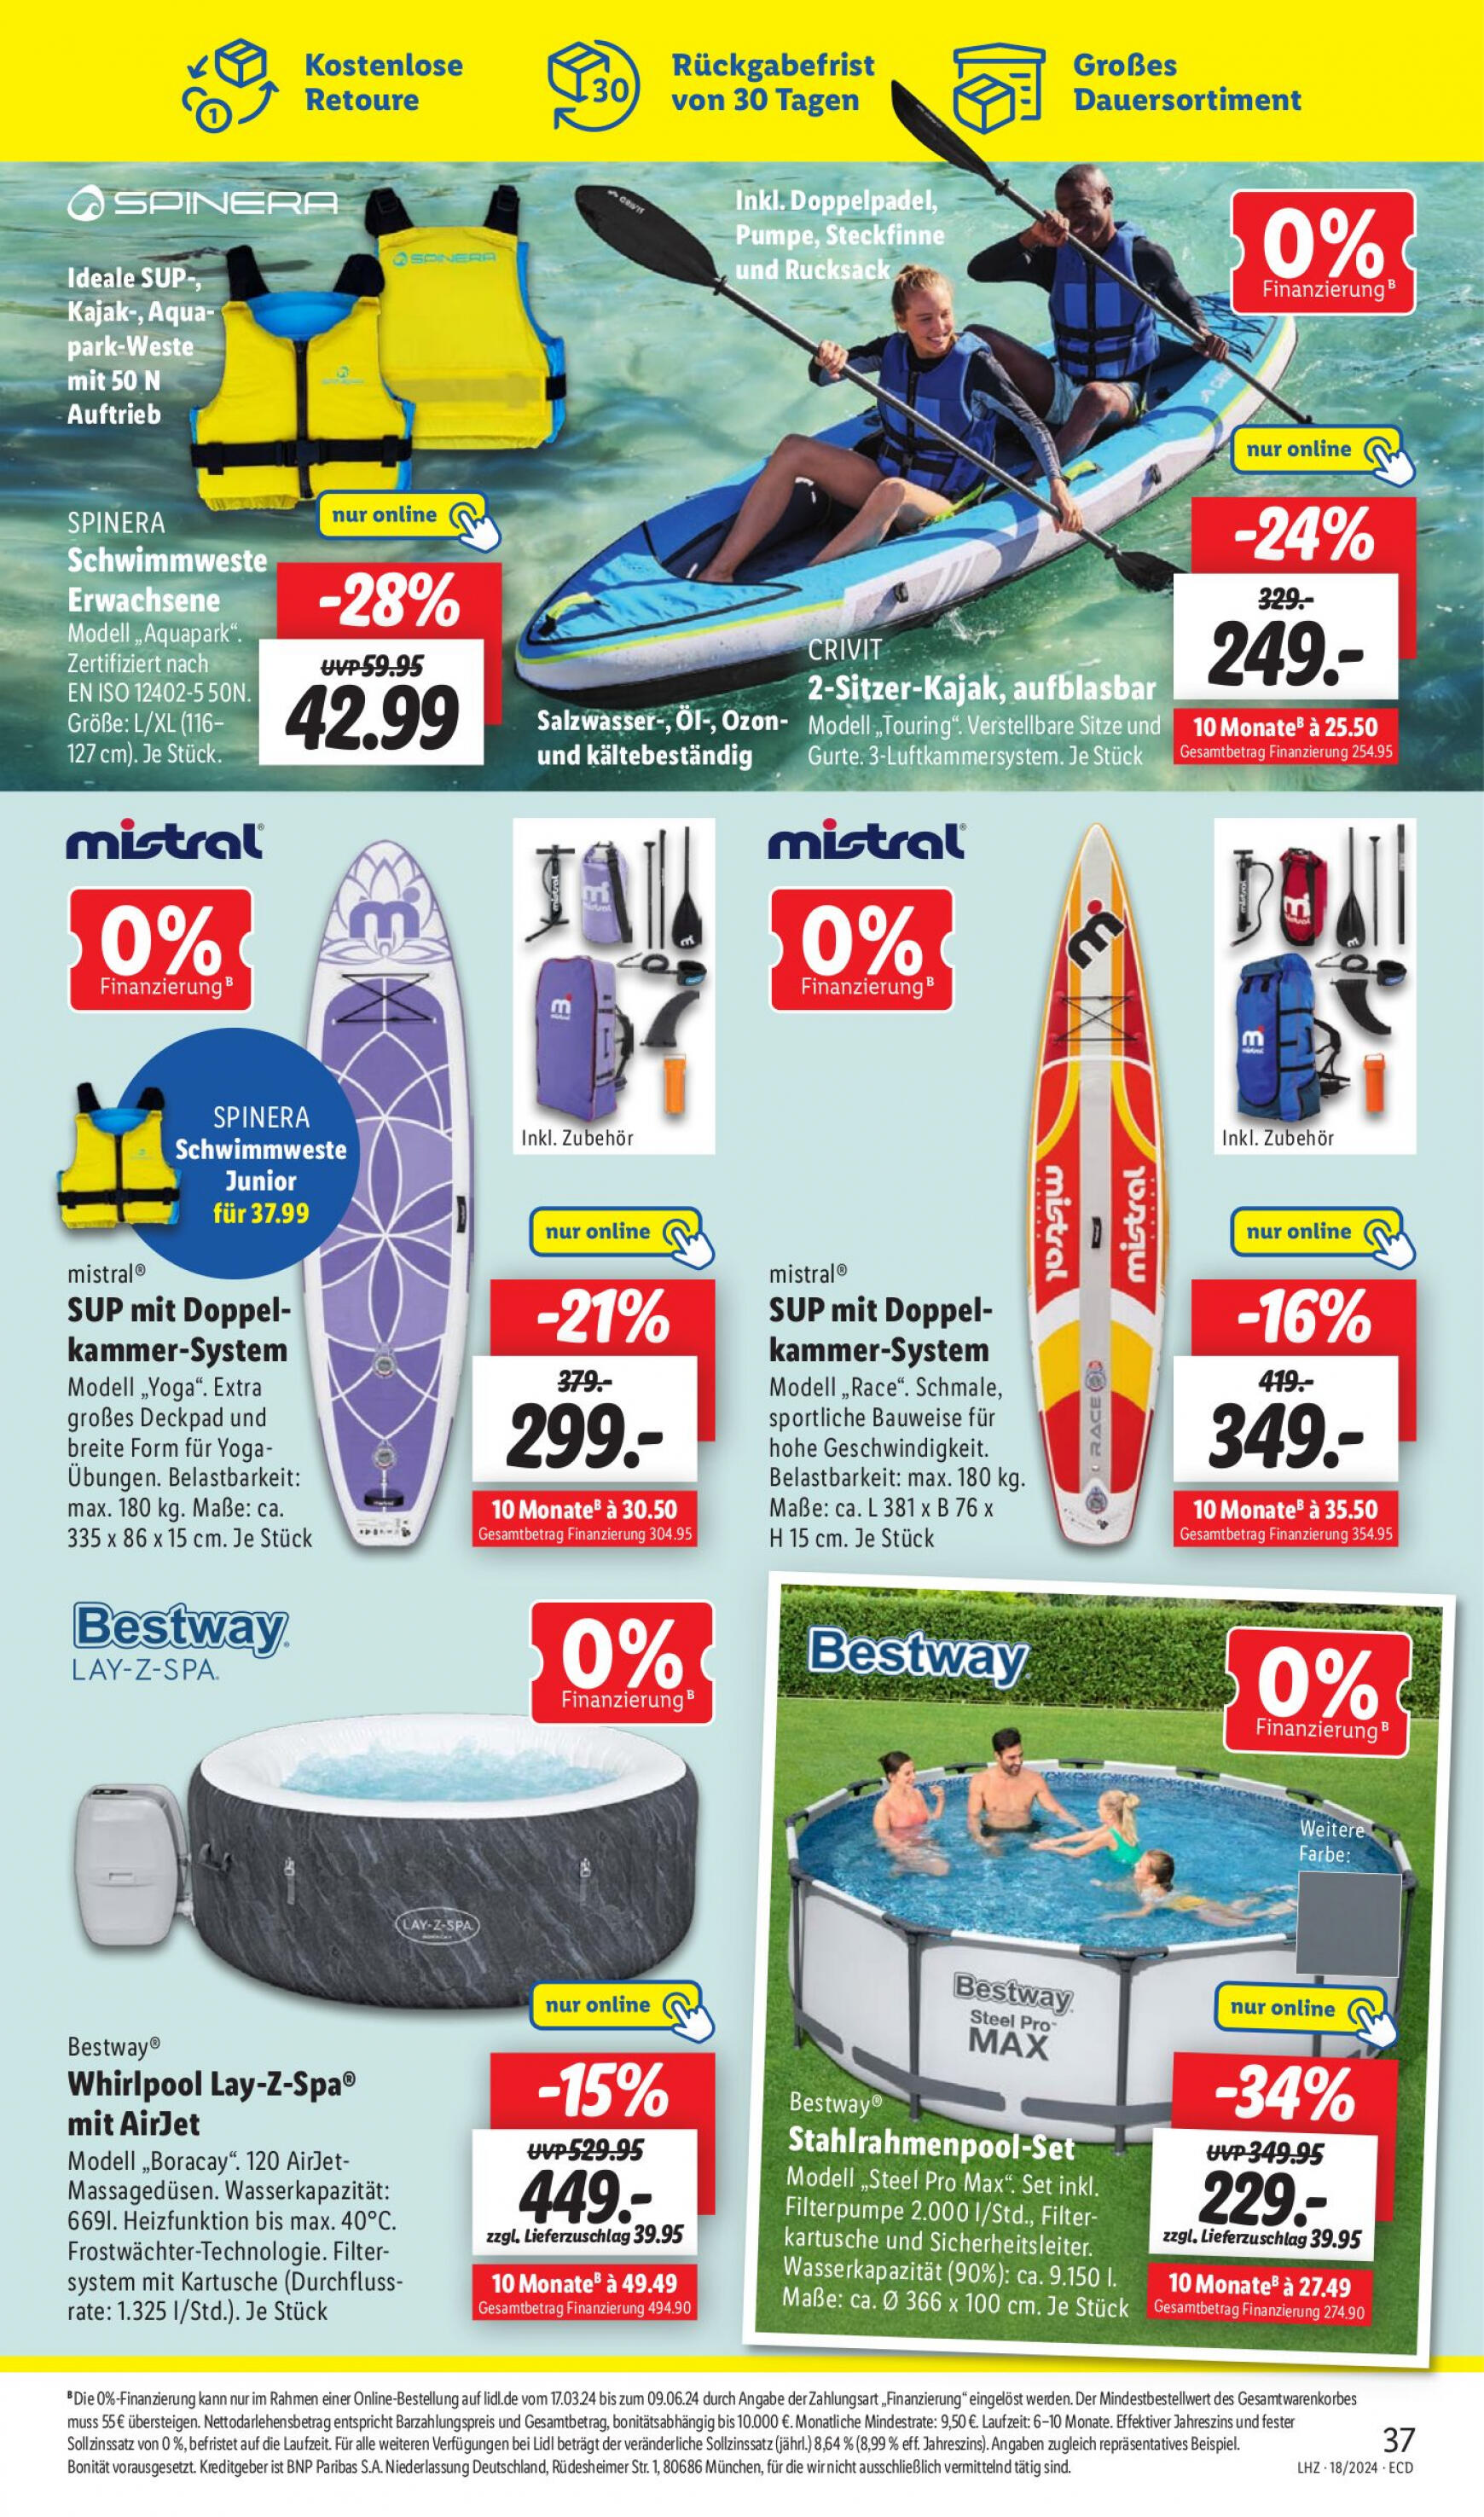 lidl - Flyer Lidl aktuell 29.04. - 04.05. - page: 45